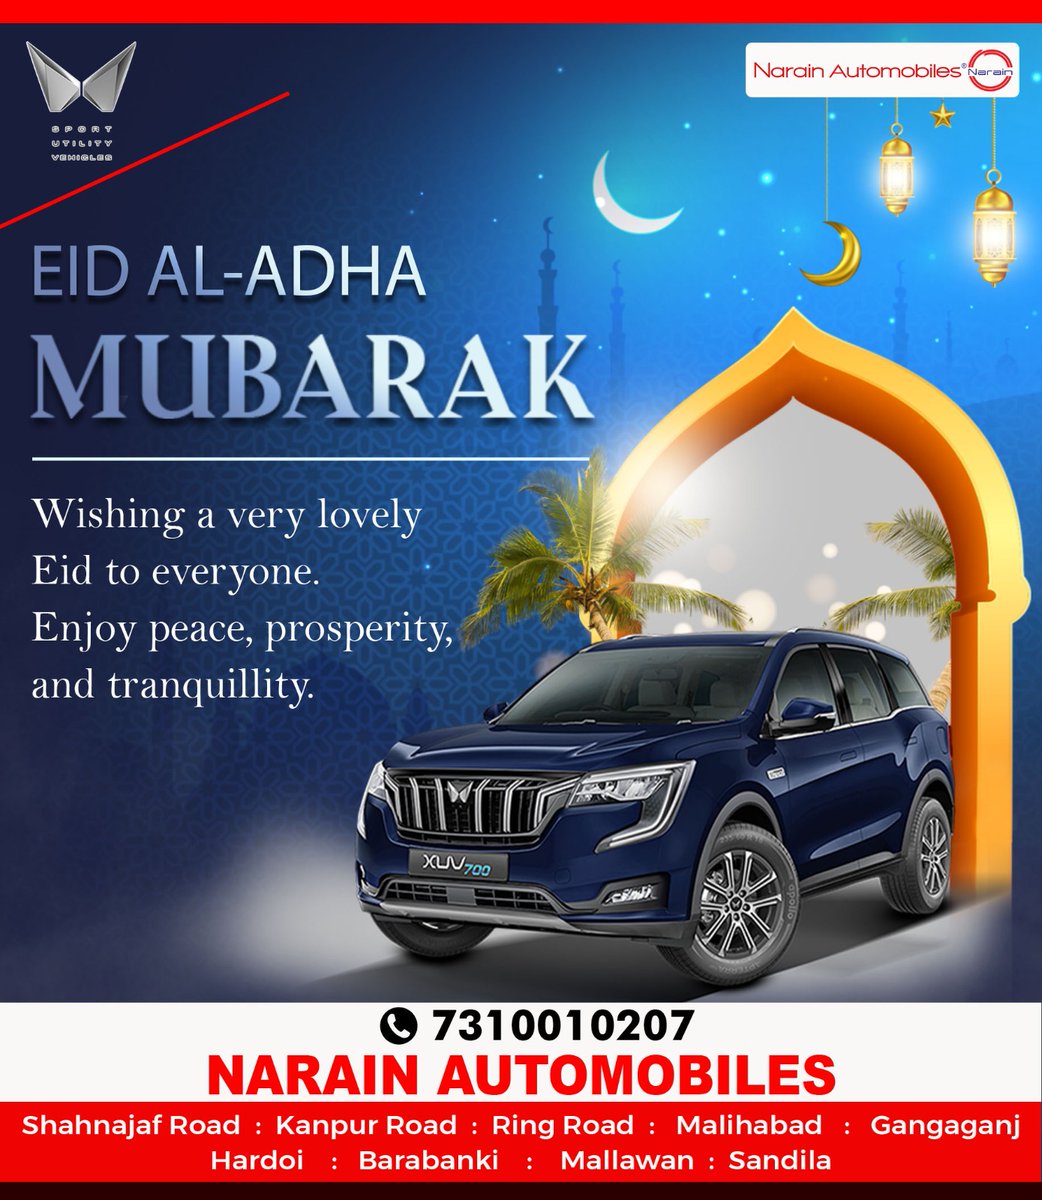 On this glorious day, we wish that may your faith and love for Almighty be rewarded with peace, happiness, and success in all your endeavours

🕌 Have a blessed Eid Al-Adha! 🐐
#eidaladha #eid #eidmubarak #iduladha #ramadan  #withyouhamesha #mahindrashowroom #mahindraworkshop